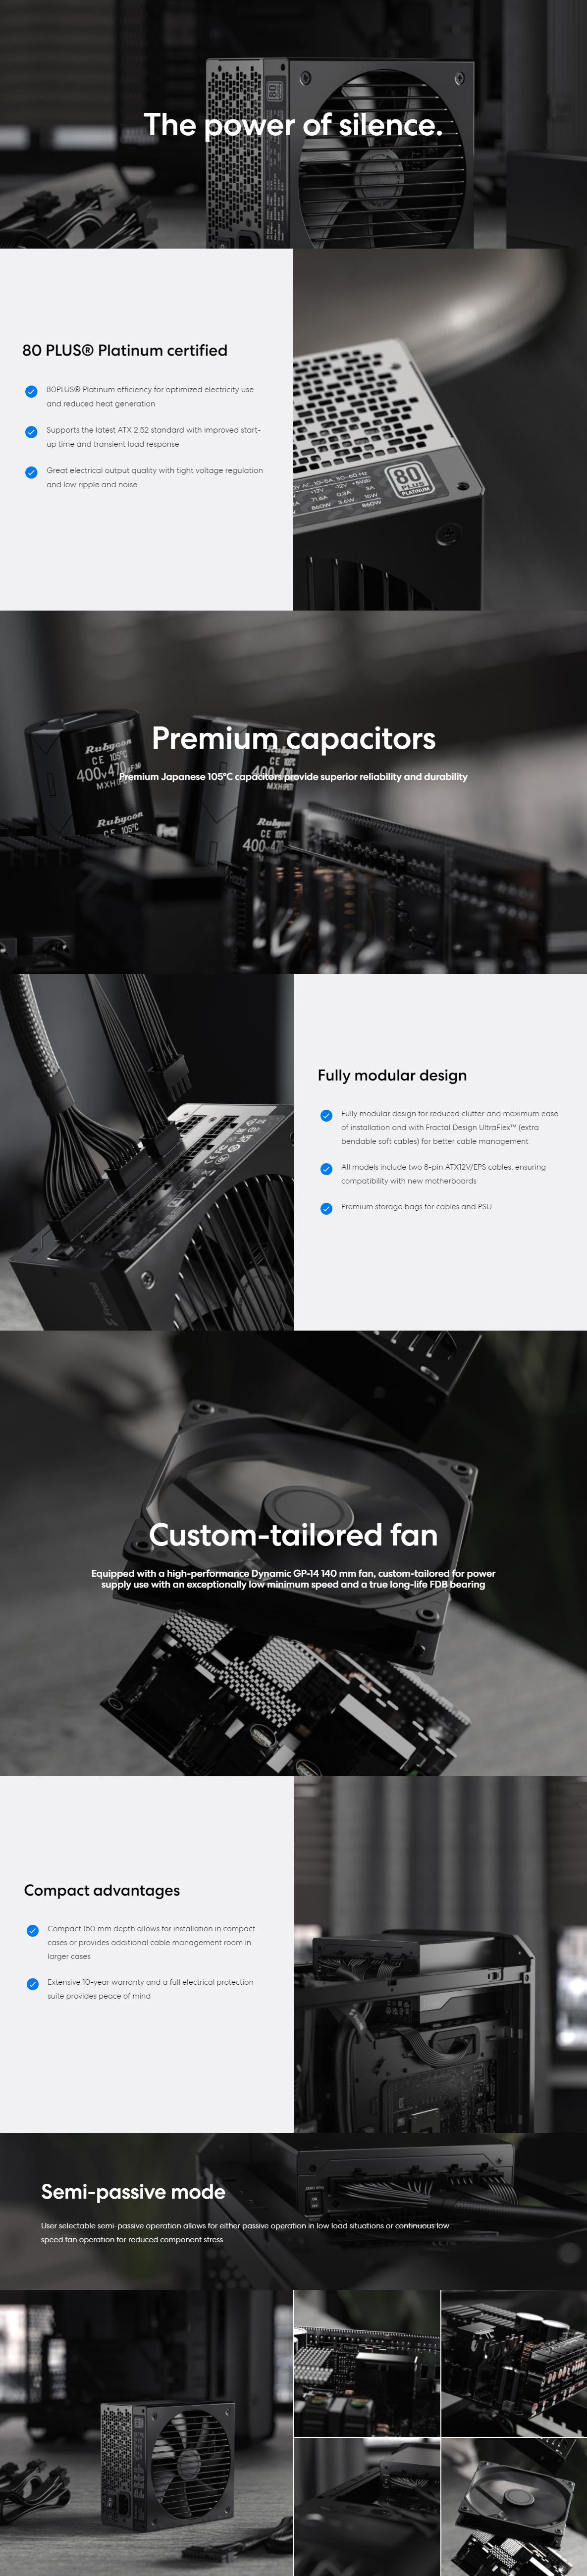 A large marketing image providing additional information about the product Fractal Design Ion+ 2 660W Platinum ATX Modular PSU - Additional alt info not provided